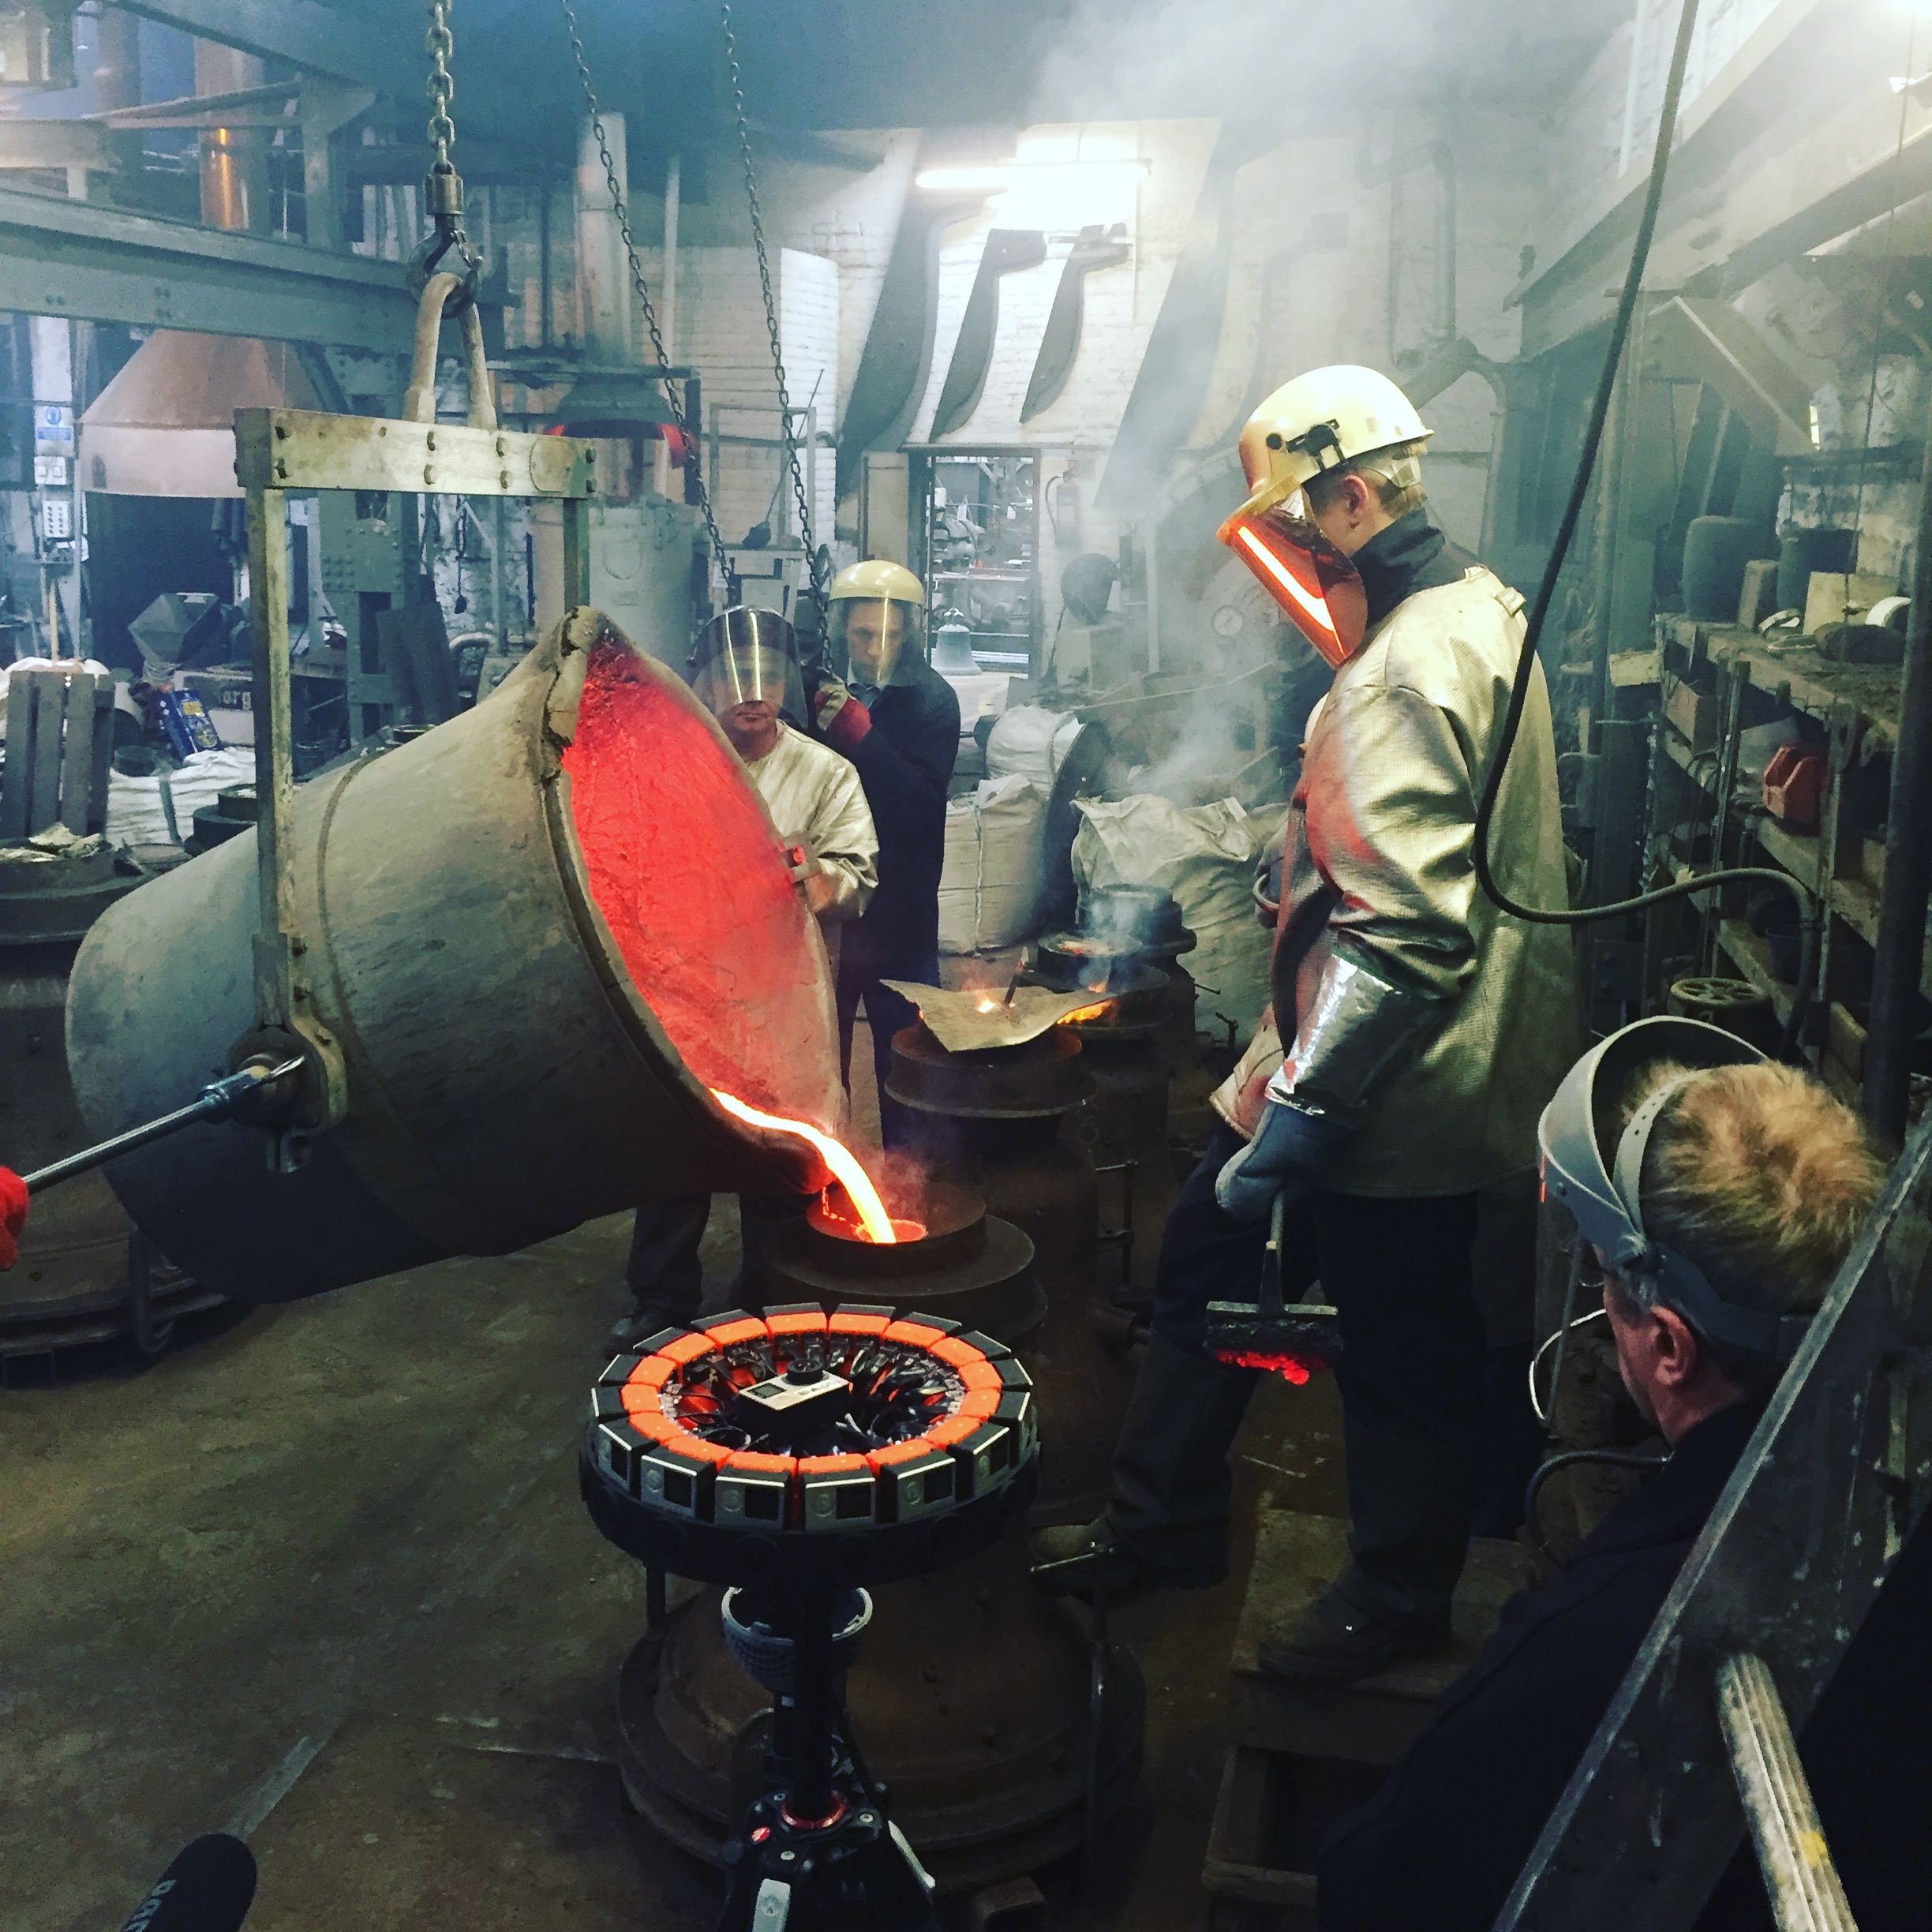 visualise capture the historic final bell casting in 3d 360 at the whitechapel bell foundry